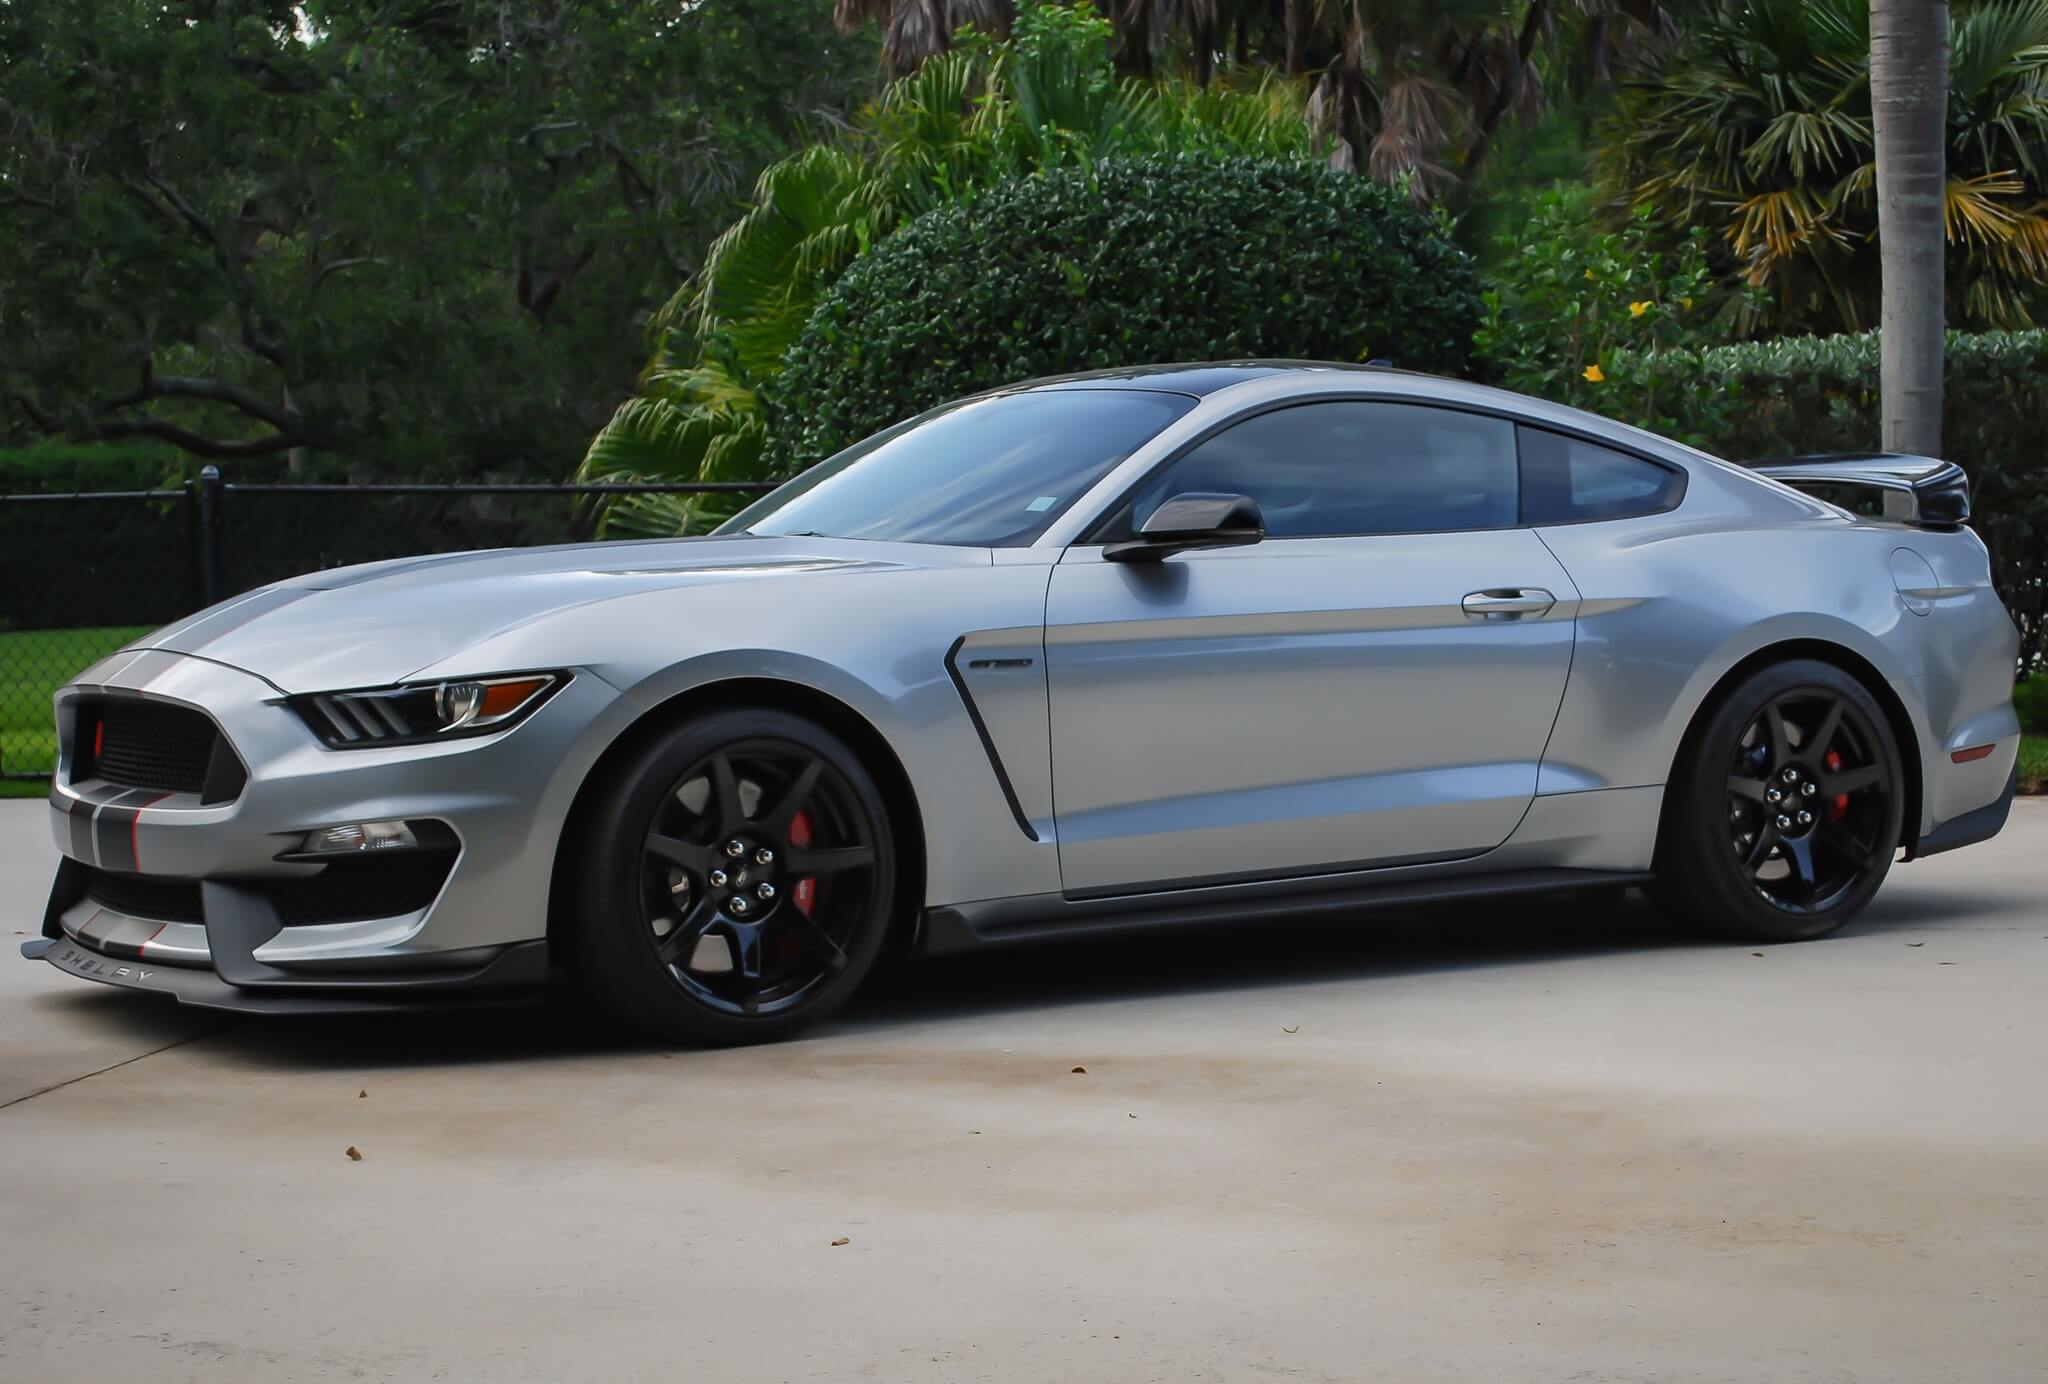 Mustang Of The Day: 2020 Ford Mustang Shelby GT350R - Mustang Specs